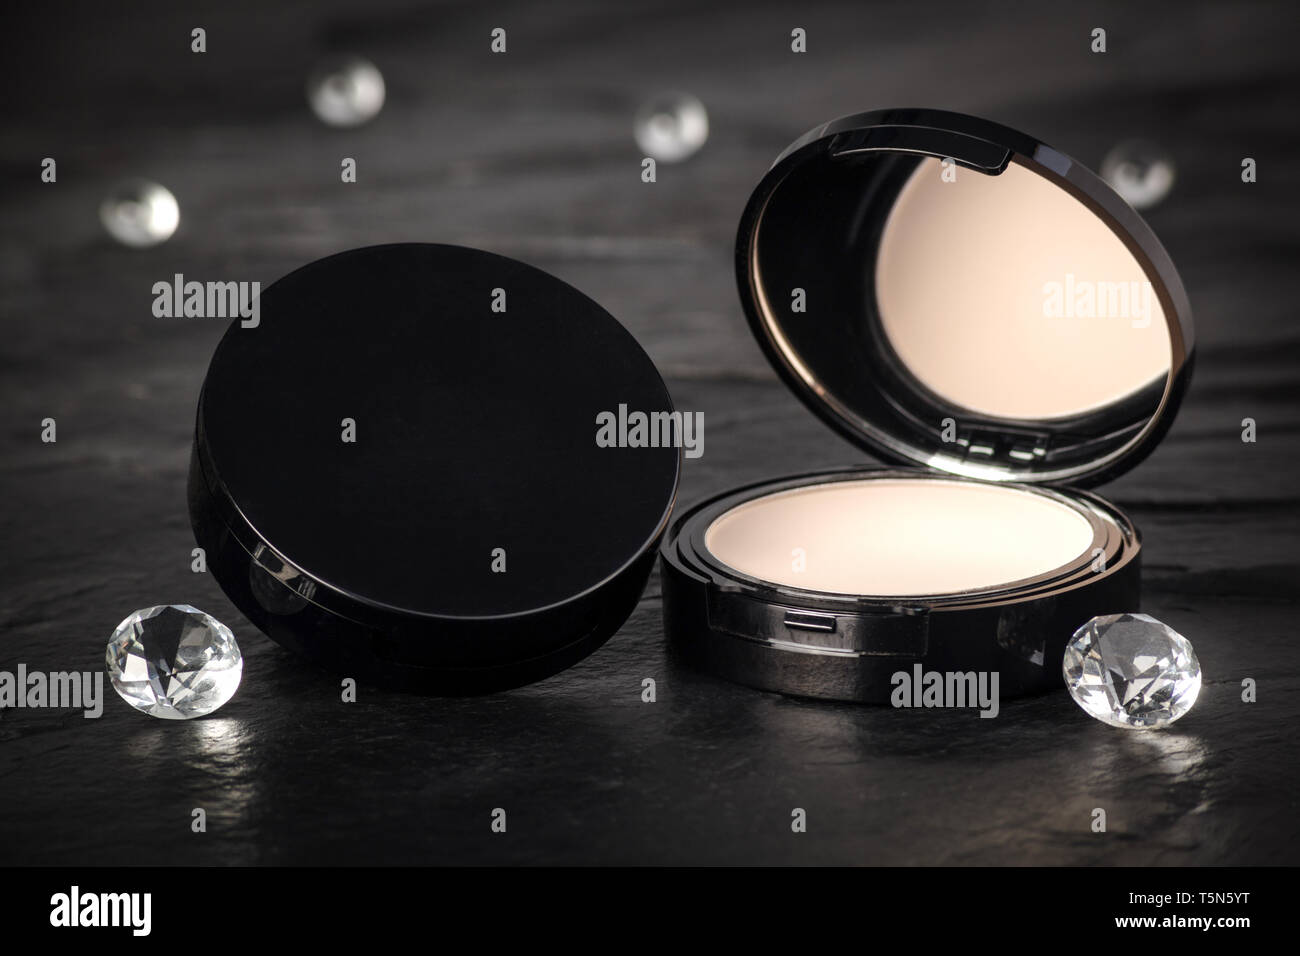 Make-up Powder open compact with Black Background Stock Photo